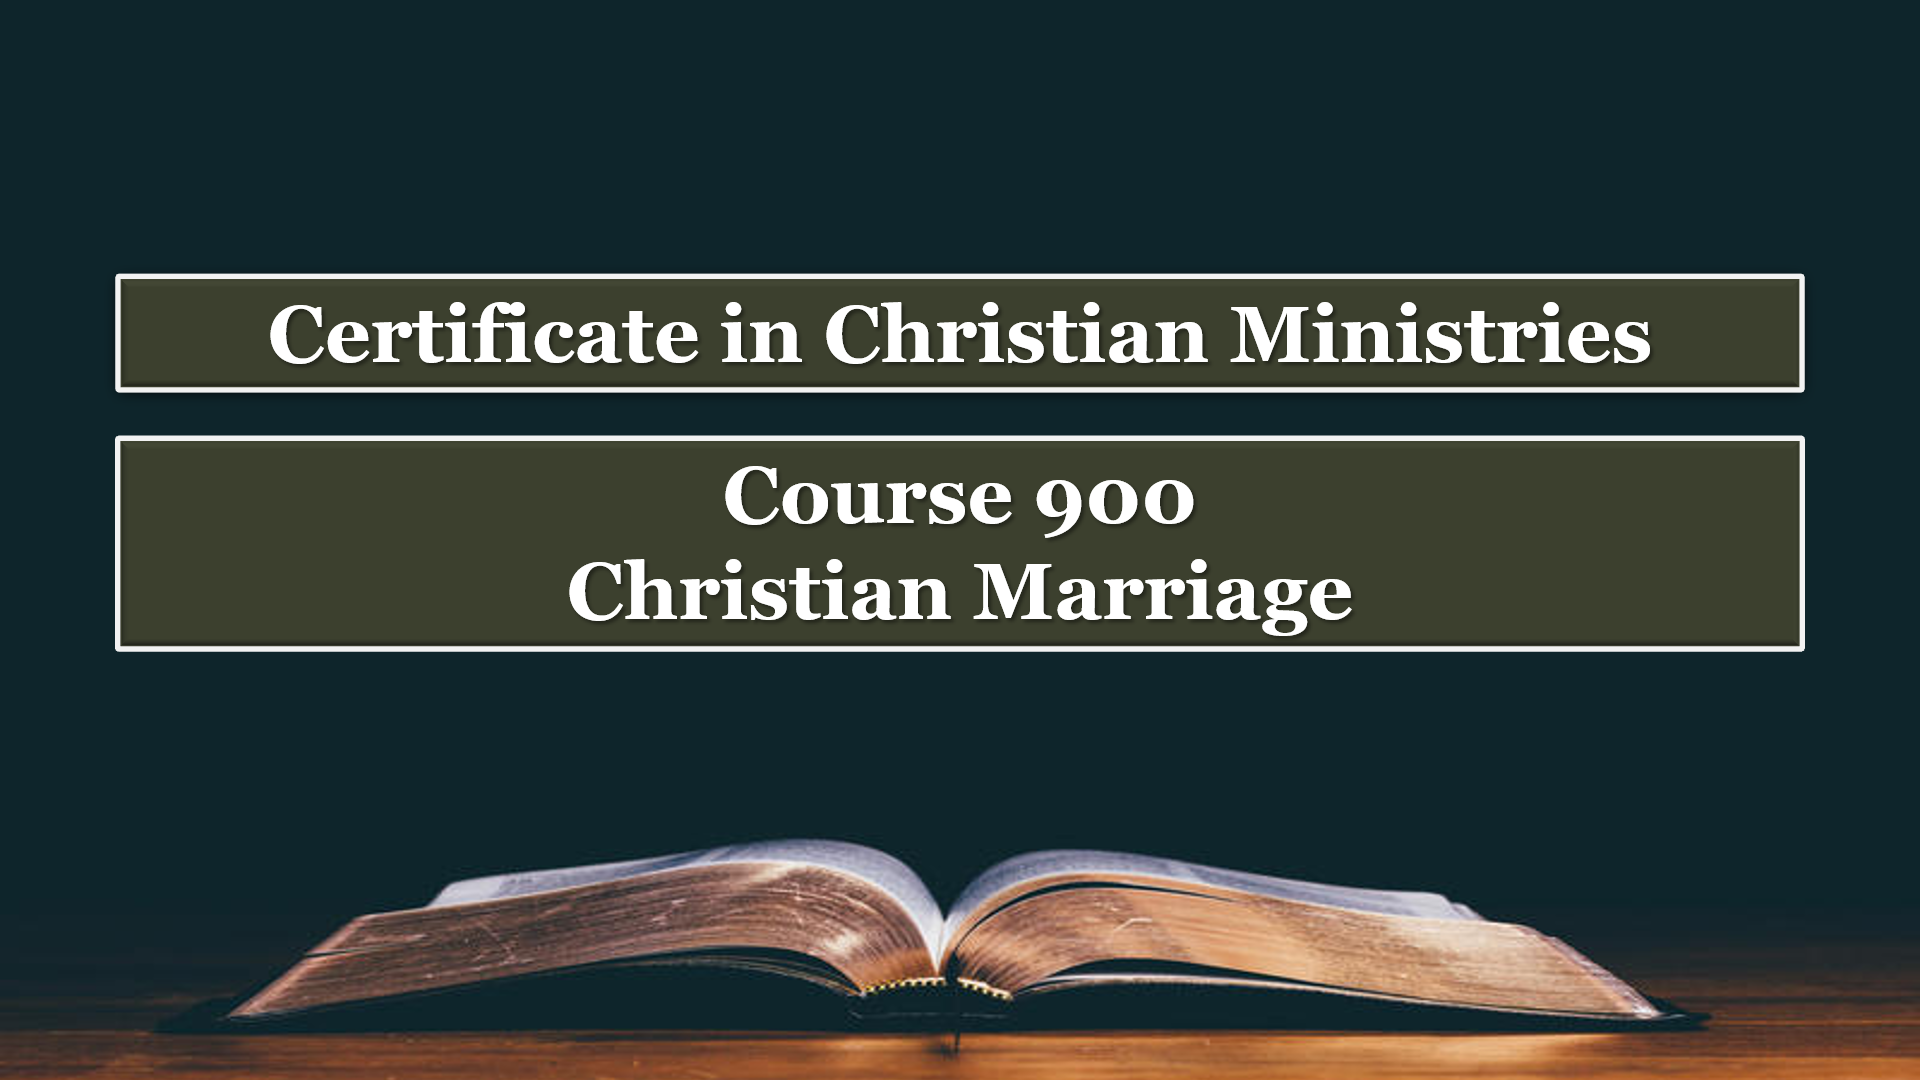 Course 900: Christian Marriage